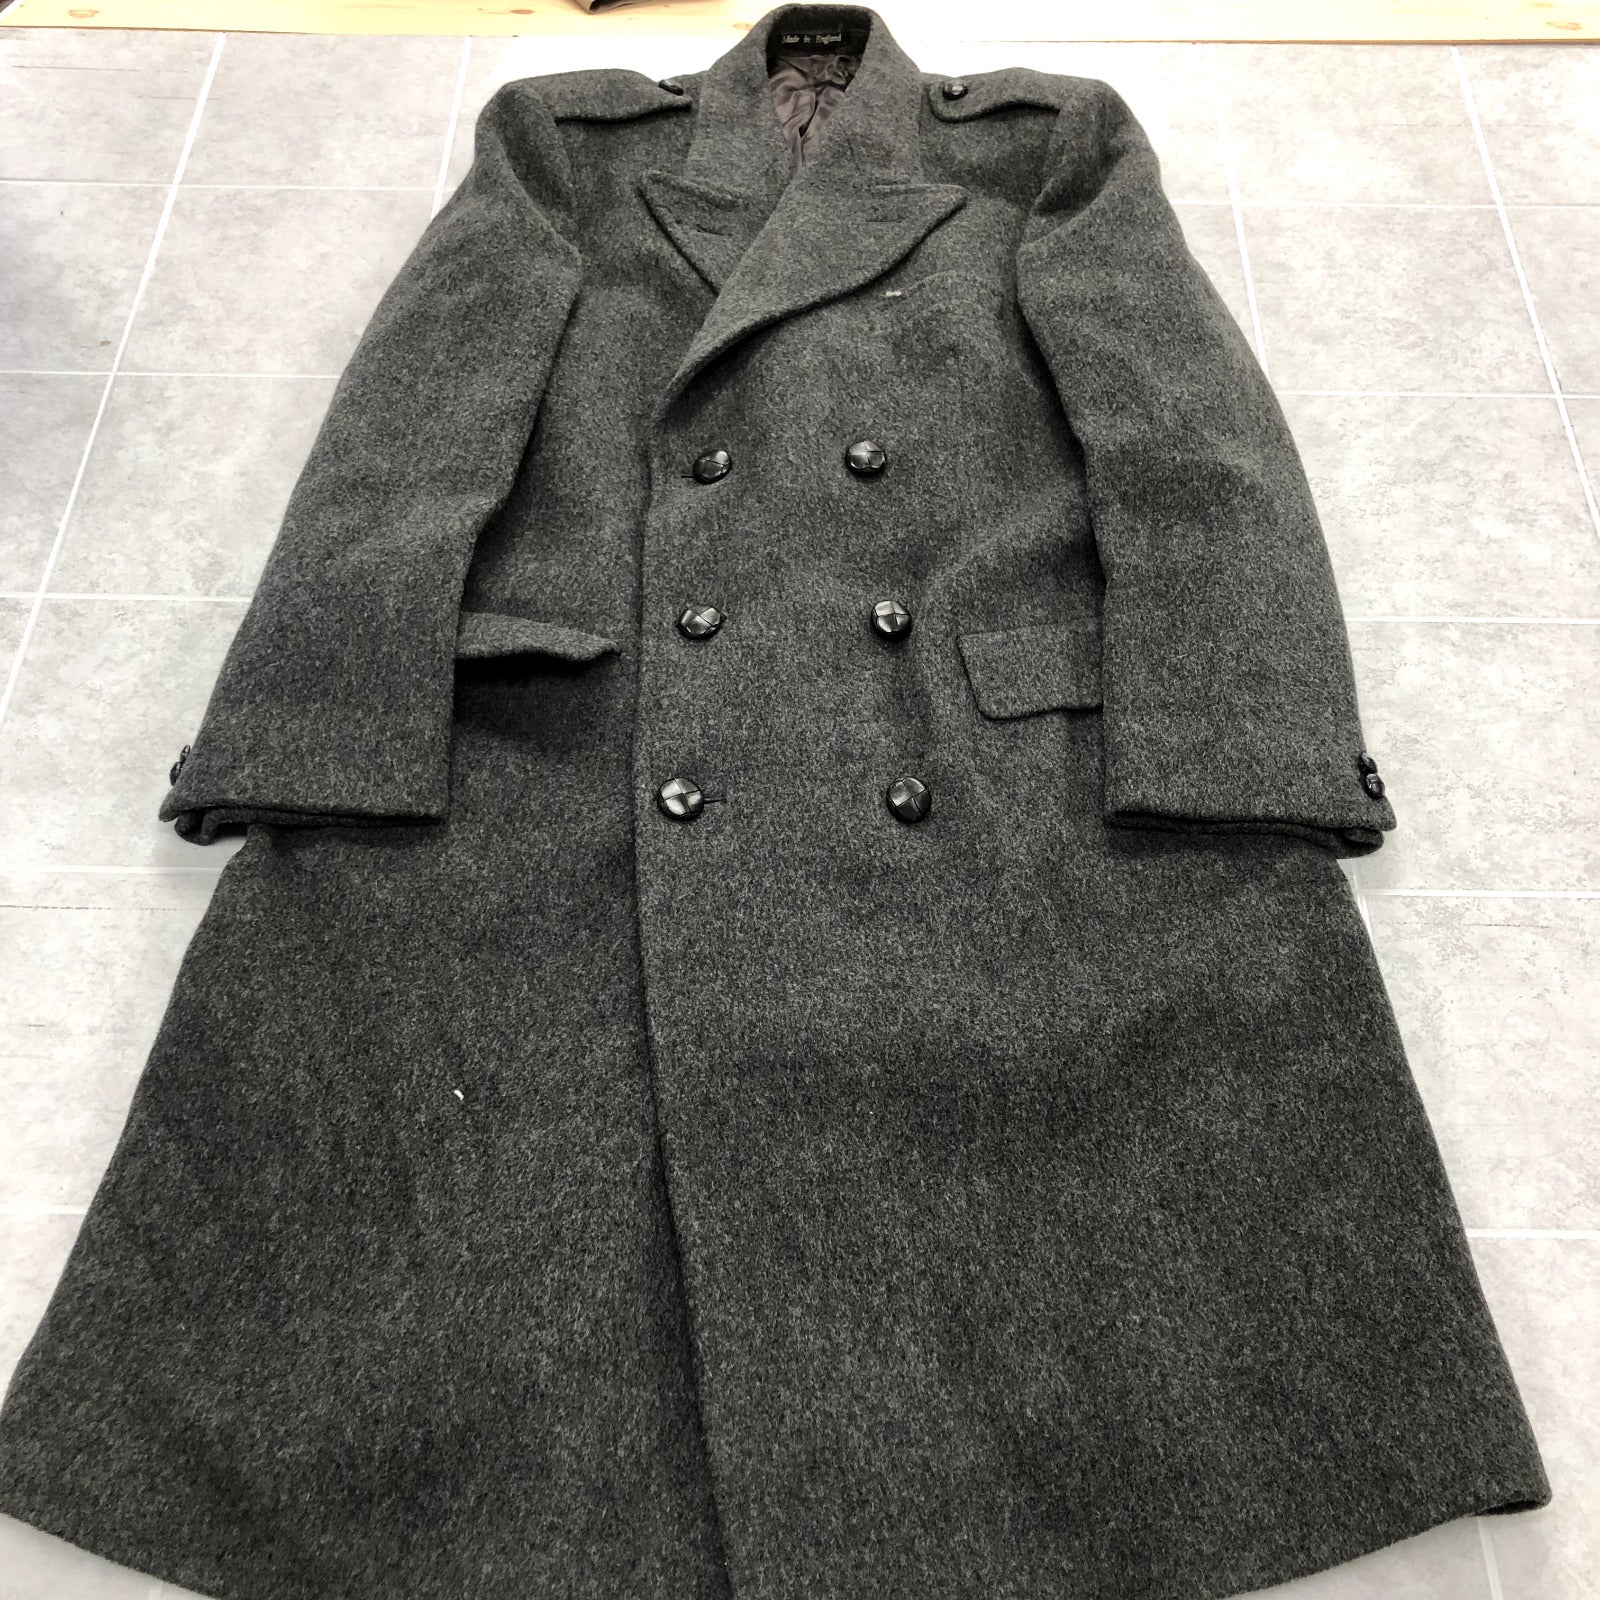 Vintage Mark Shale Gray Long Sleeve Lined DB Wool Overcoat Adult Size 44R